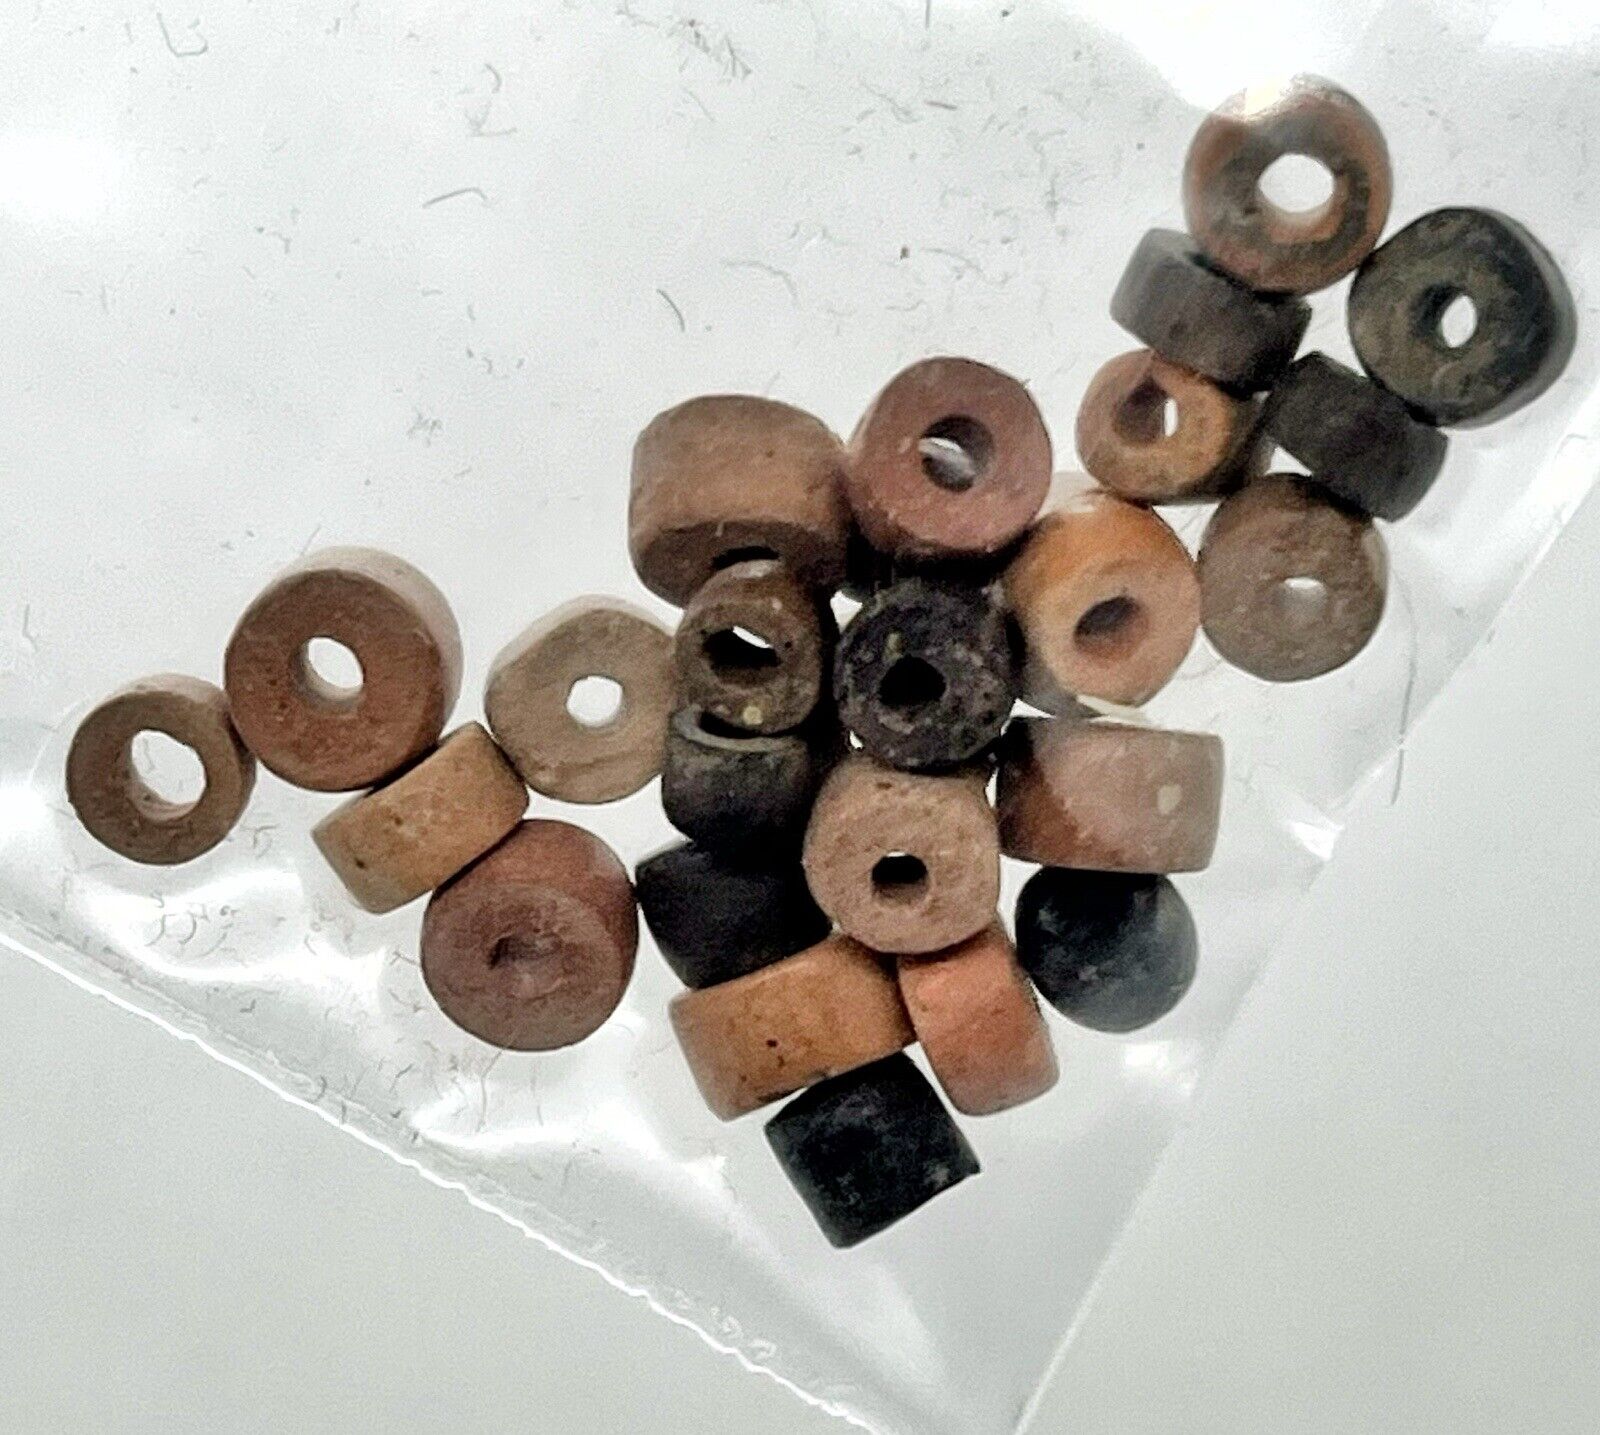 25 RARE Authentic Ancient Native American Bead Artifacts Ex-Private Collection C